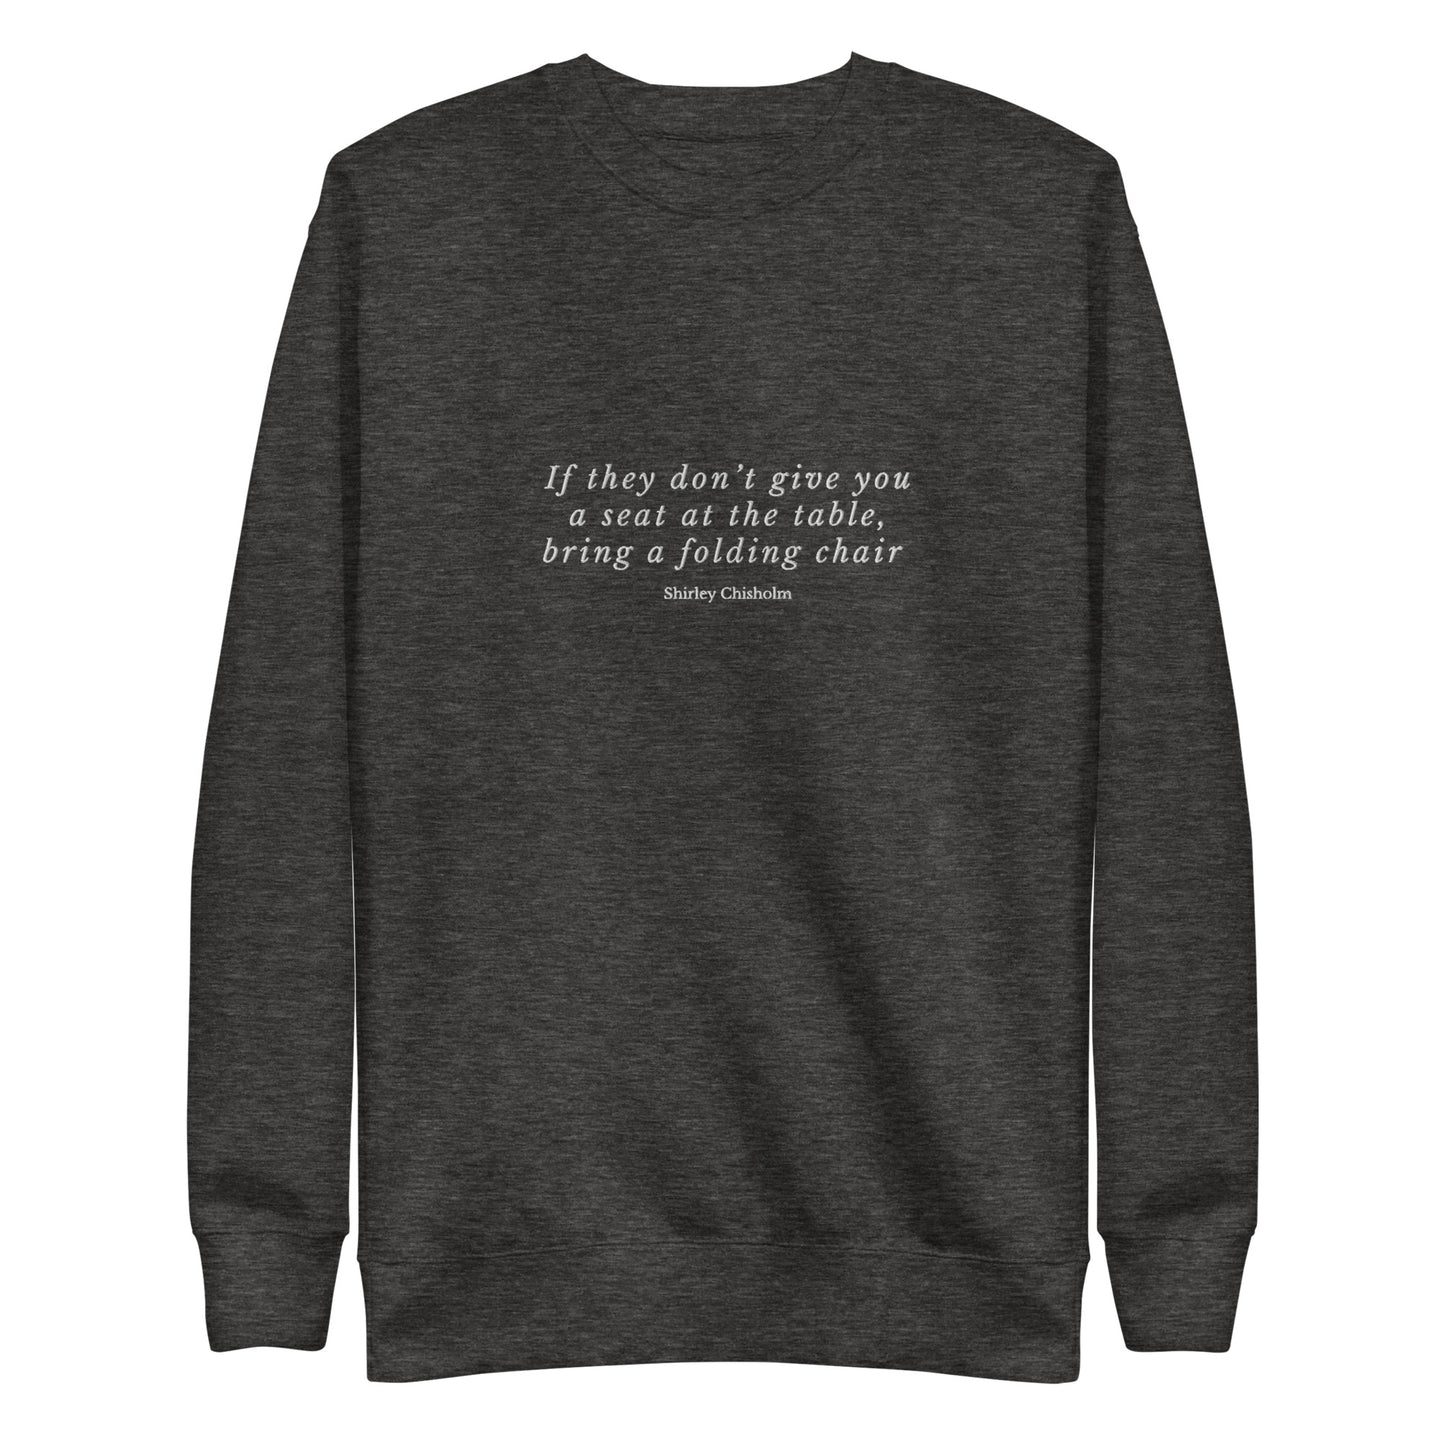 Seat at the Table Embroidered Sweatshirt